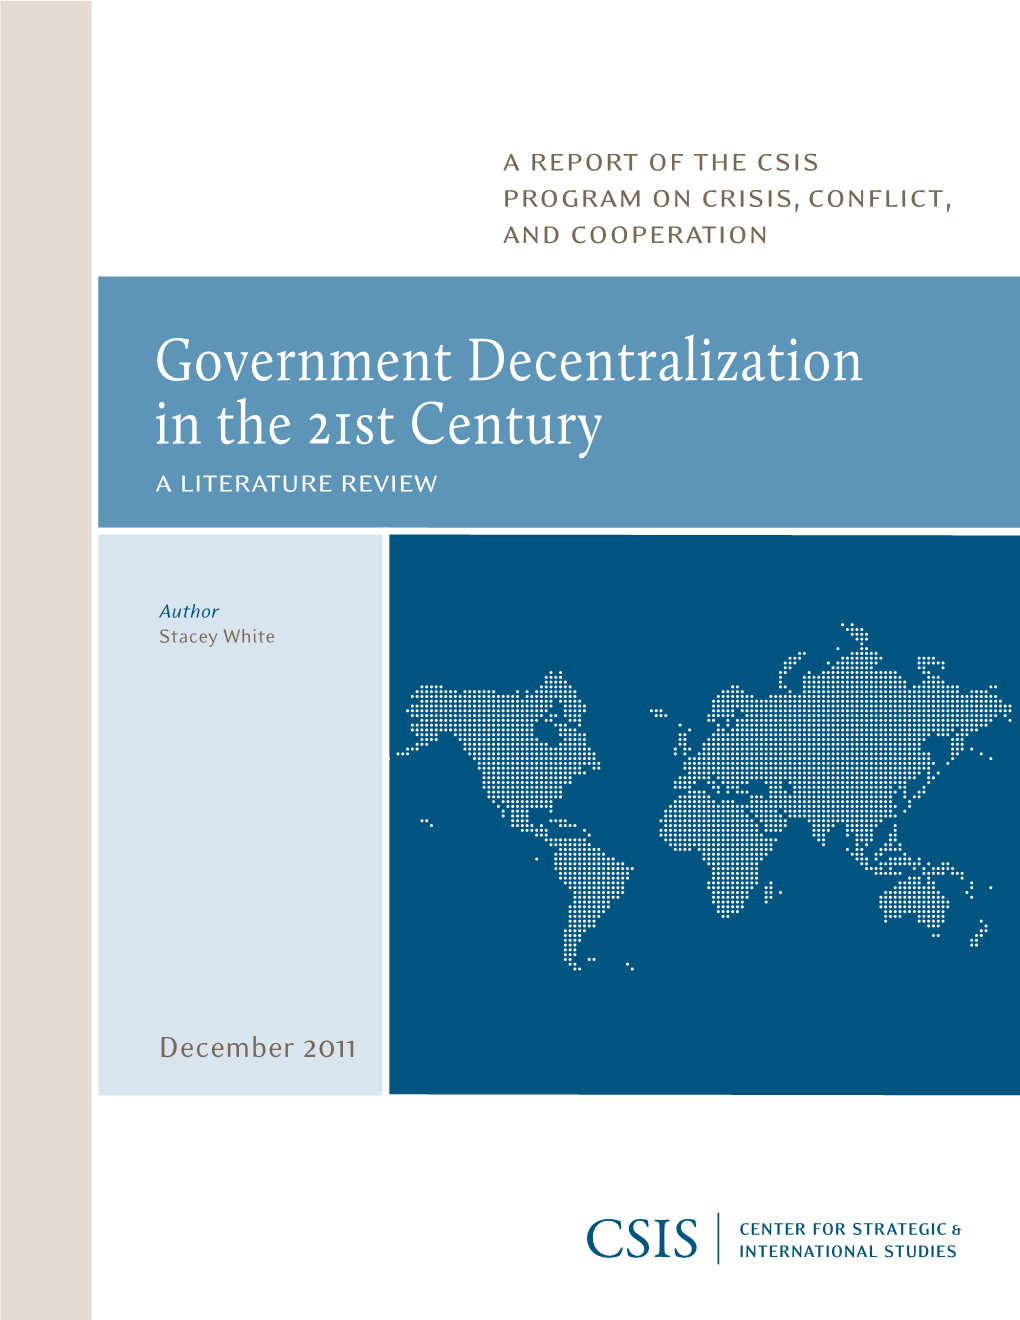 Government Decentralization in the 21St Century: a Literature Review